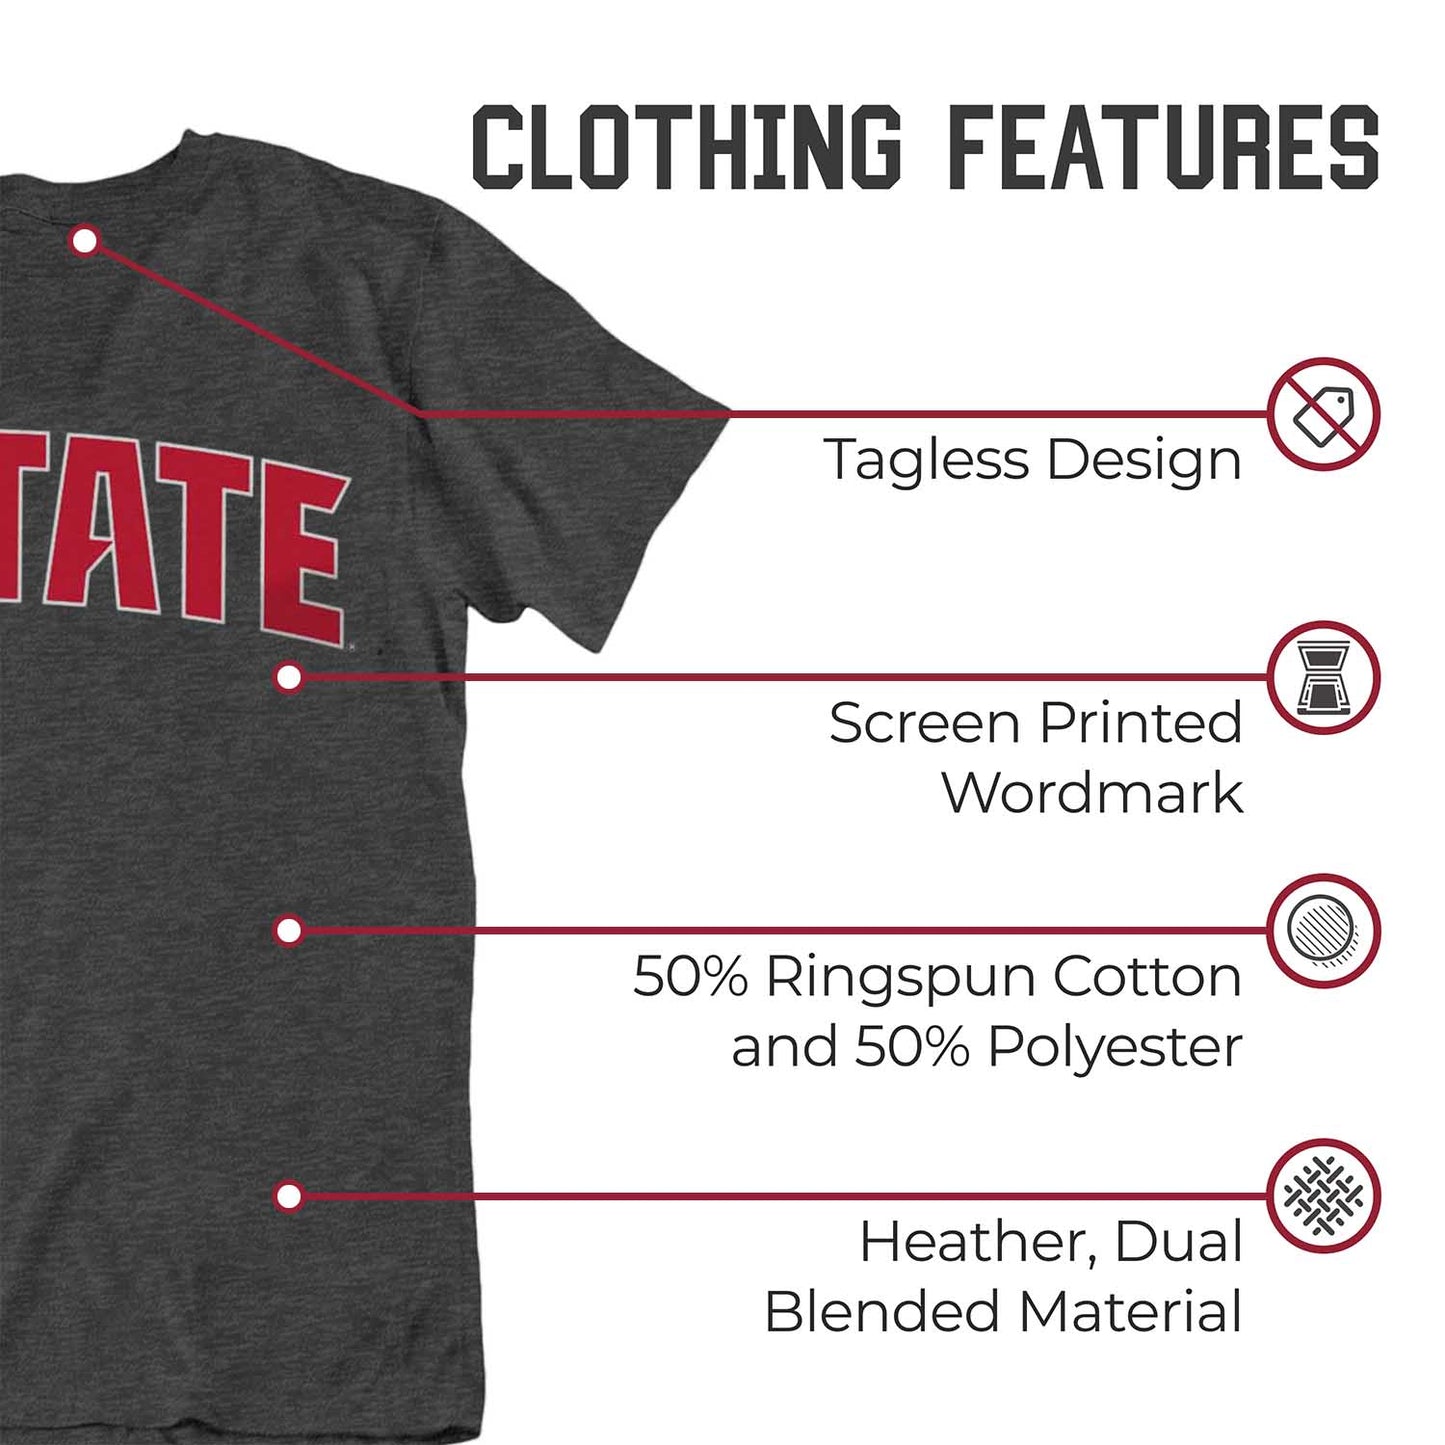 NC State Wolfpack Campus Colors NCAA Adult Cotton Blend Charcoal Tagless T-Shirt - Charcoal